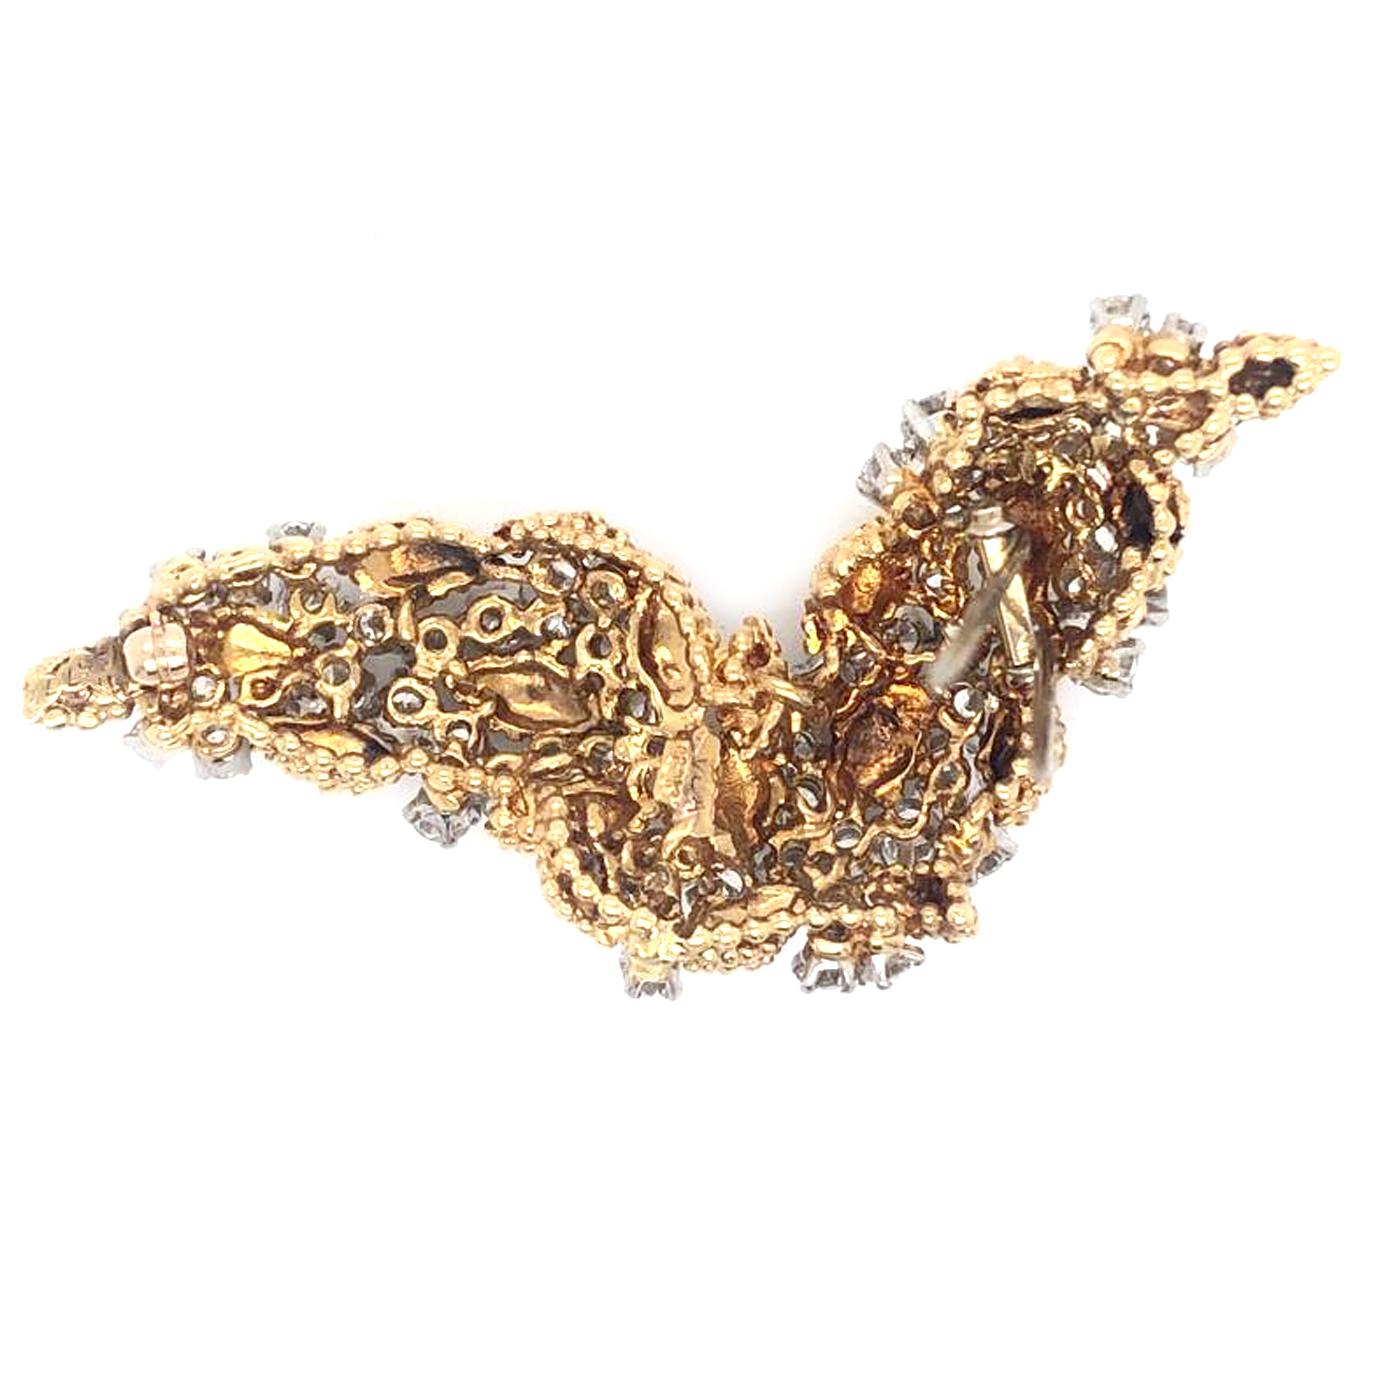 Bird Shape Diamond Pin in 18 karats yellow gold and platinum. This brooch features alternating 62 Stones. The brooch features a brilliant cut of diamonds, The diamond weight is 9.00 carat E-F VVS -VS. with 26.70g Weight, This is a Premium 18K Yellow